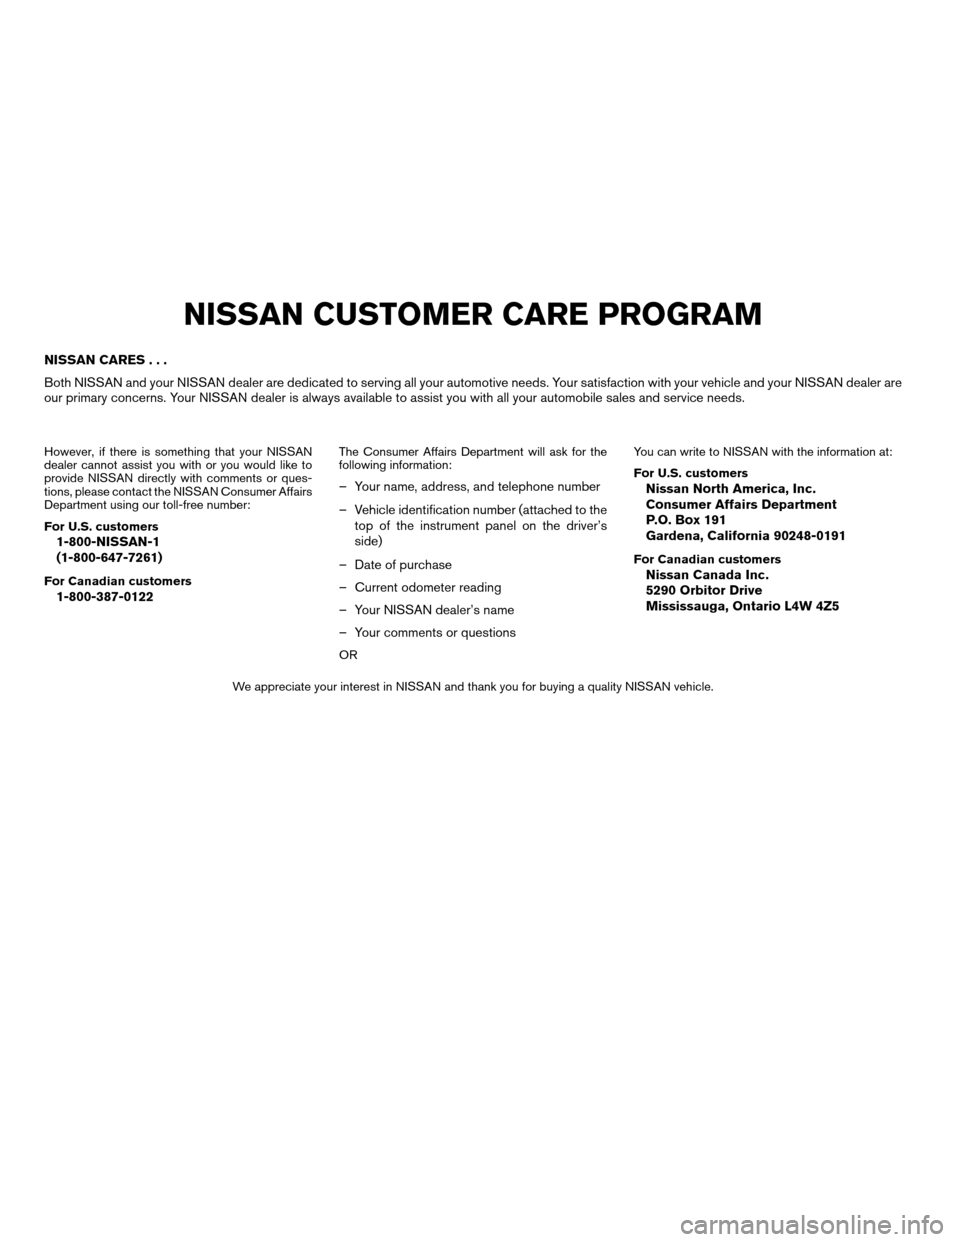 NISSAN ALTIMA 2005 L31 / 3.G Owners Manual NISSAN CARES...
Both NISSAN and your NISSAN dealer are dedicated to serving all your automotive needs. Your satisfaction with your vehicle and your NISSAN dealer are
our primary concerns. Your NISSAN 